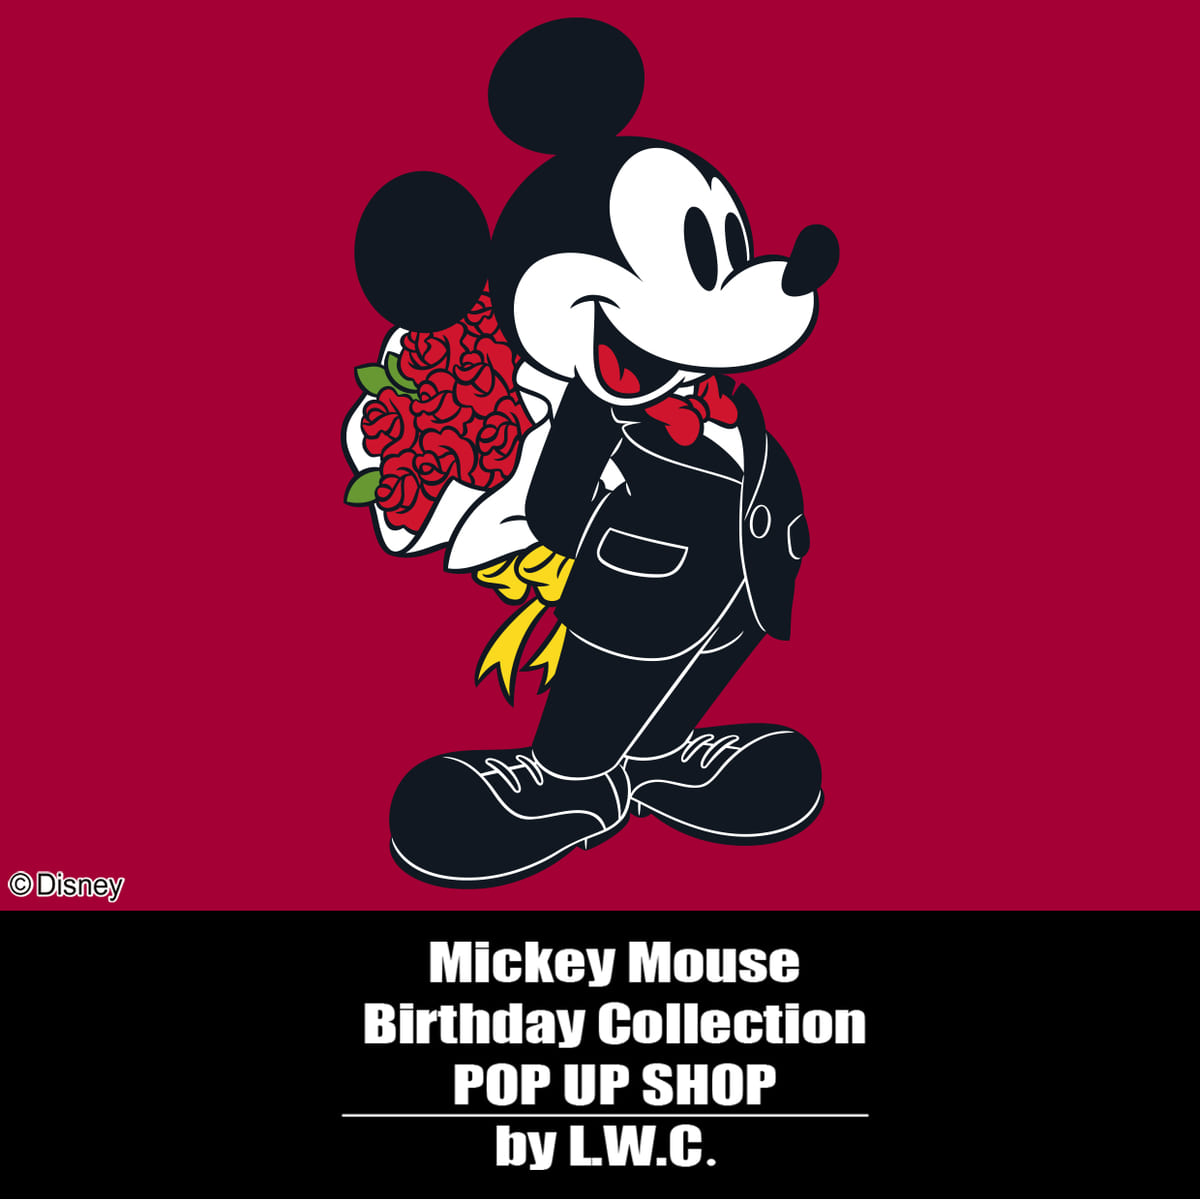 4F「Mickey Mouse Birthday Collection POP UP SHOP by L.W.C.」